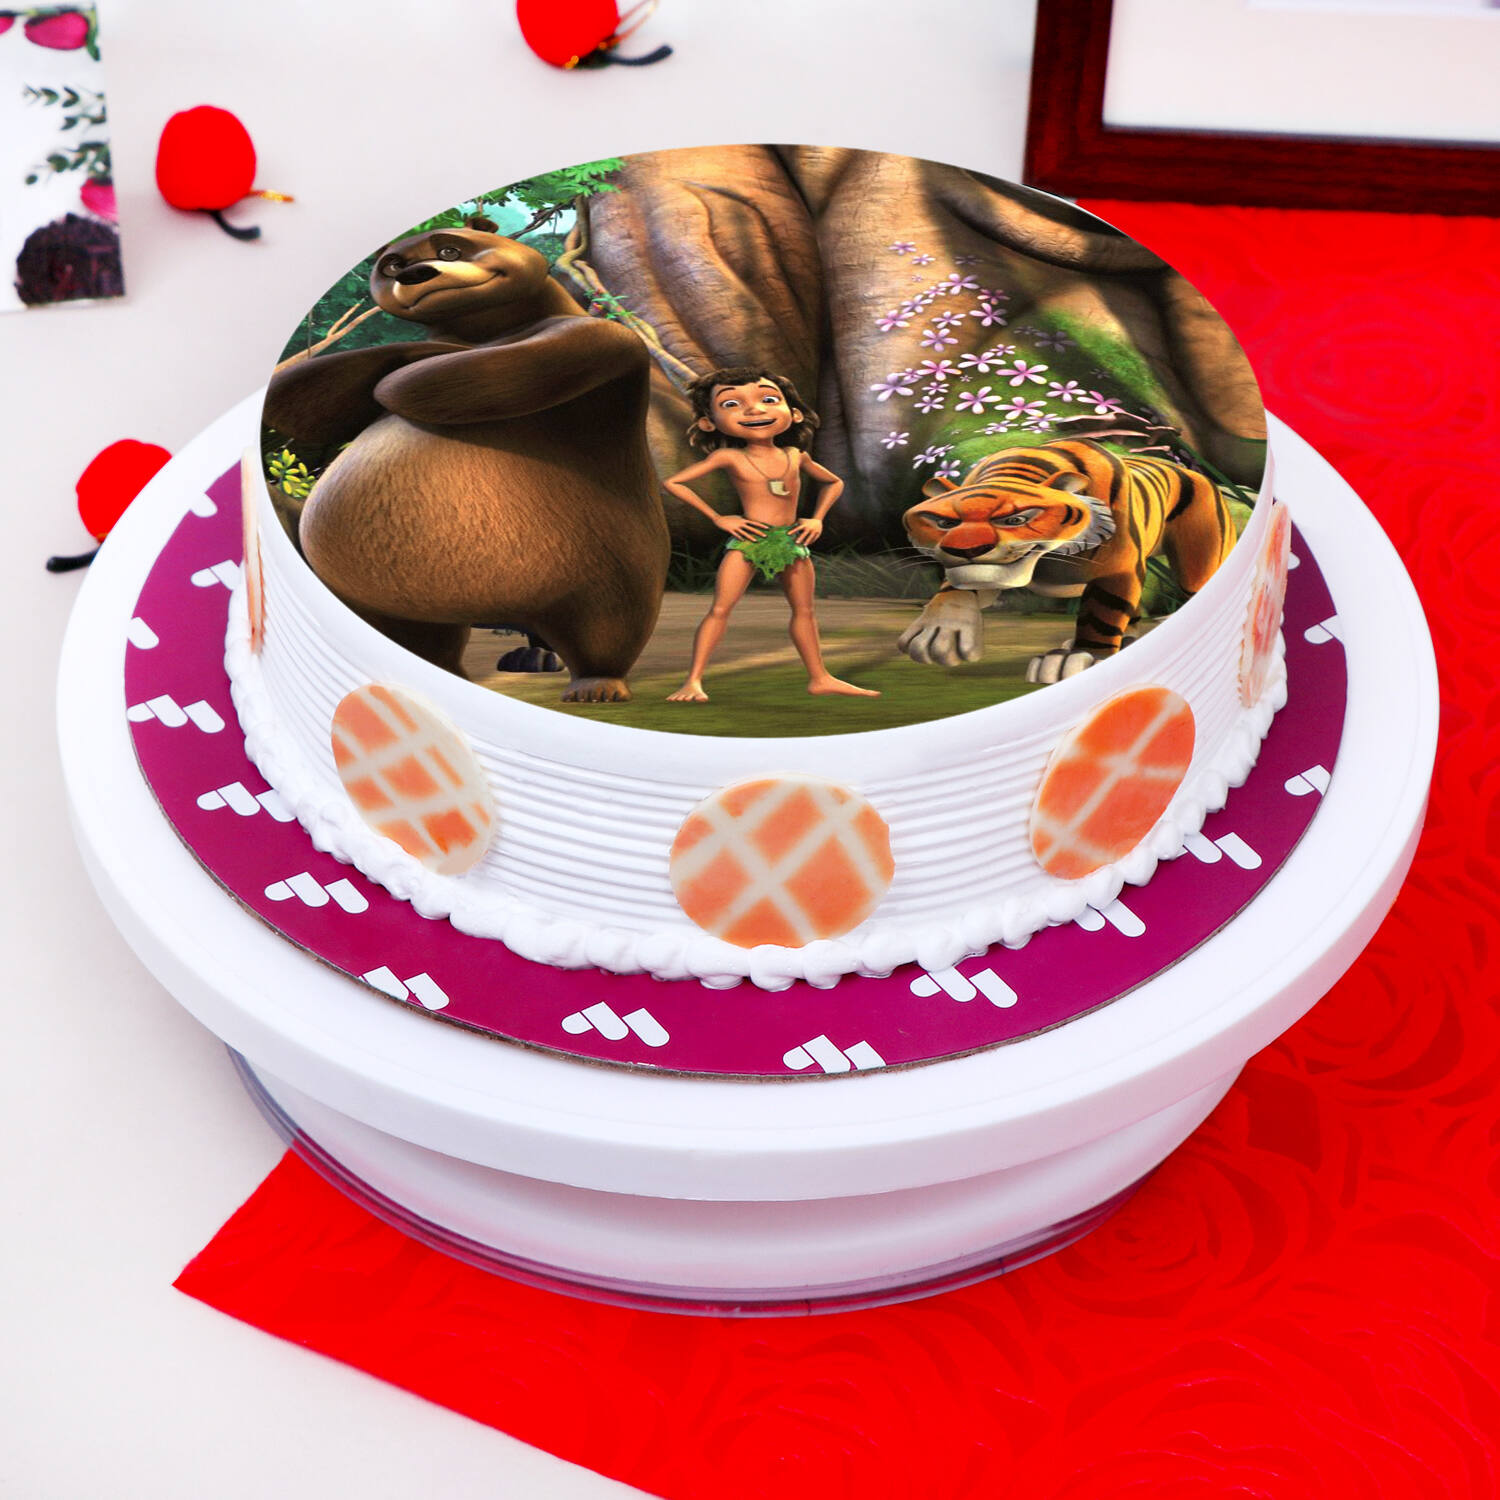 Jungle Book Chocolate Cake Delivery in Delhi NCR  124900 Cake Express